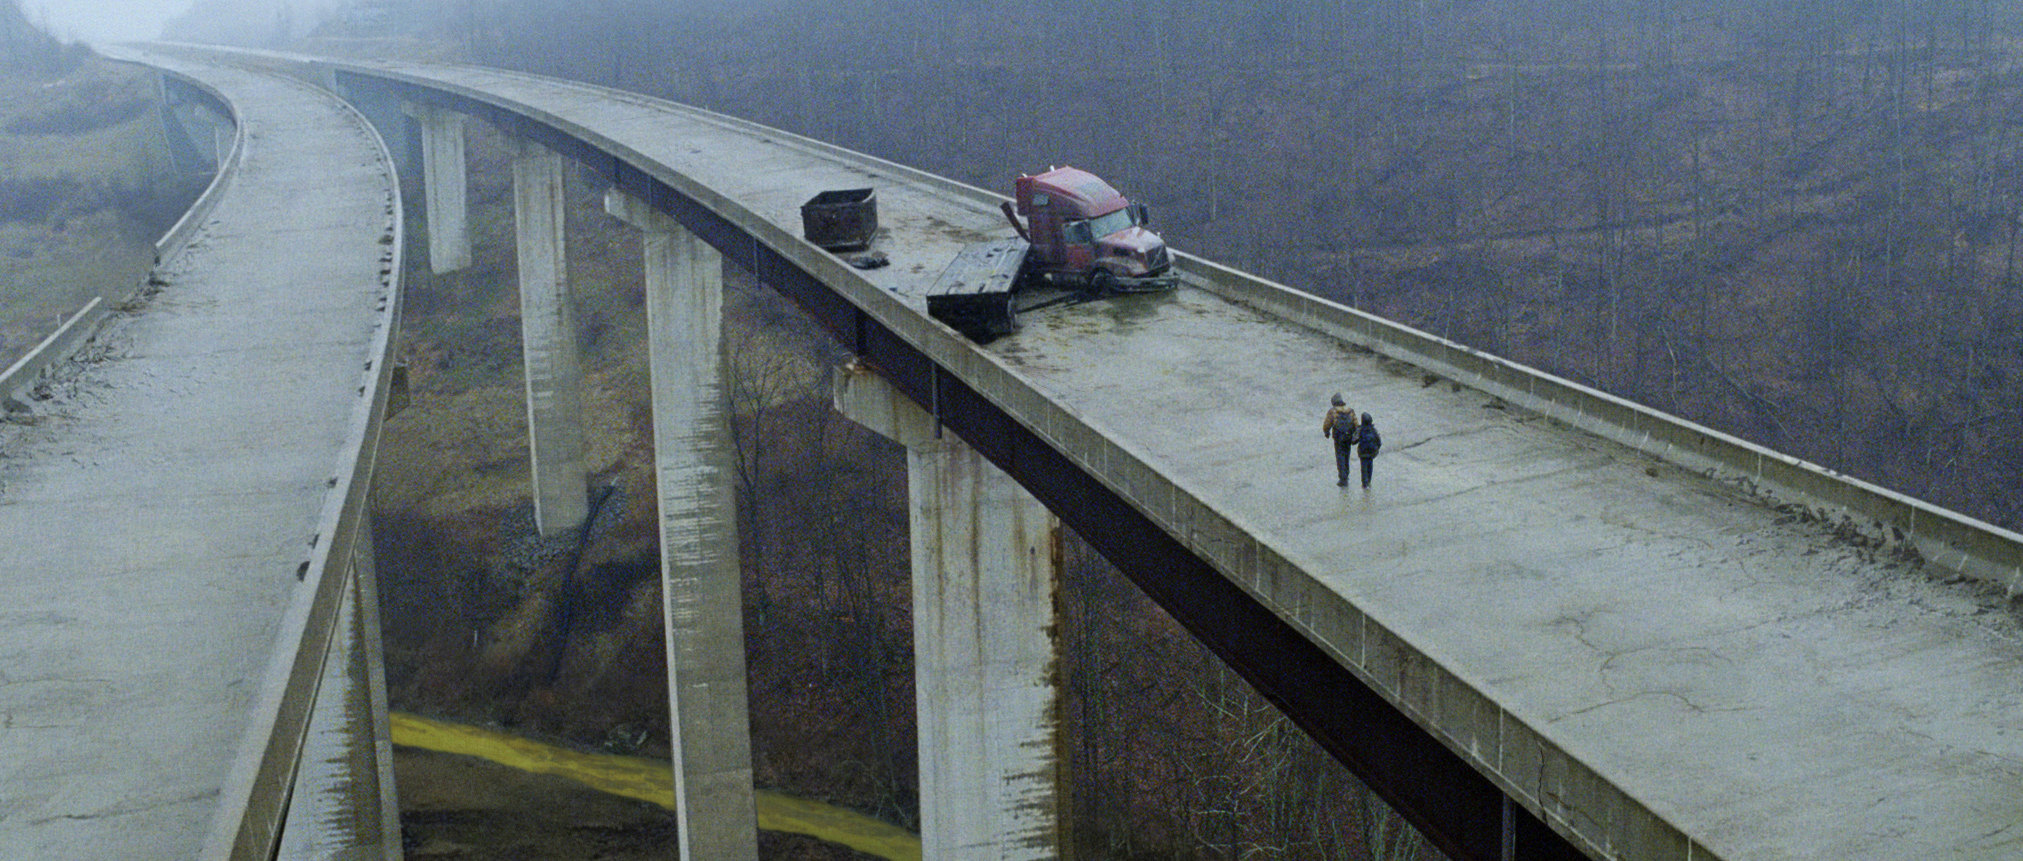 A scene from Dimension Films' The Road (2009)